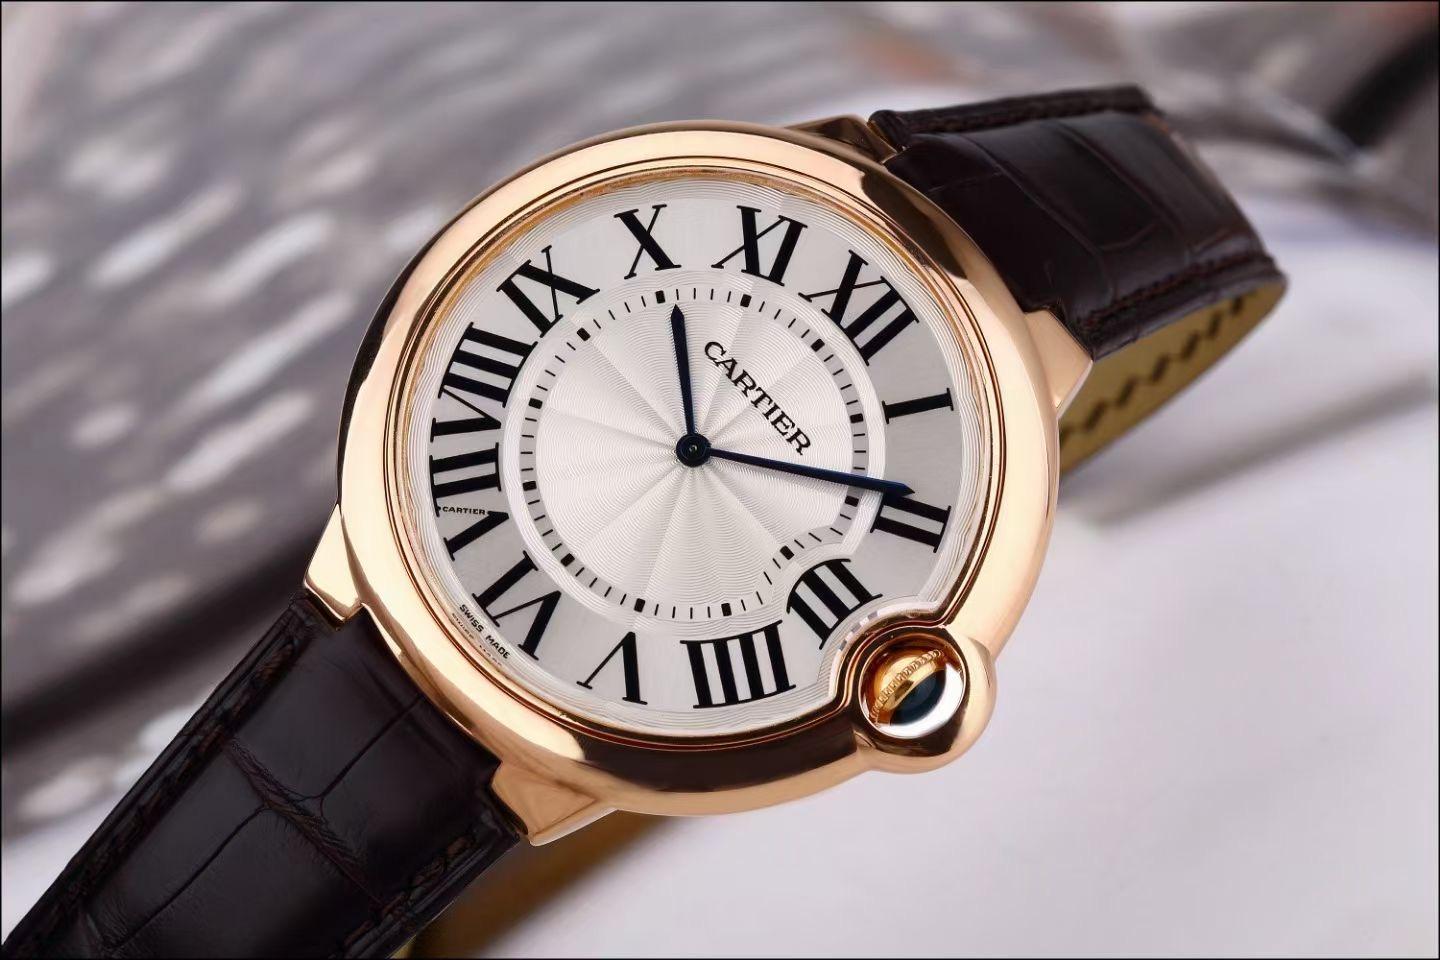 The beautiful Cartier W6920054 watch features a 18kt rose gold 46mm case, with a fixed 18kt rose gold bezel, and a silver dial covered by a sapphire crystal. The stylish wristwatch is equipped with an exclusive alligator leather which combines